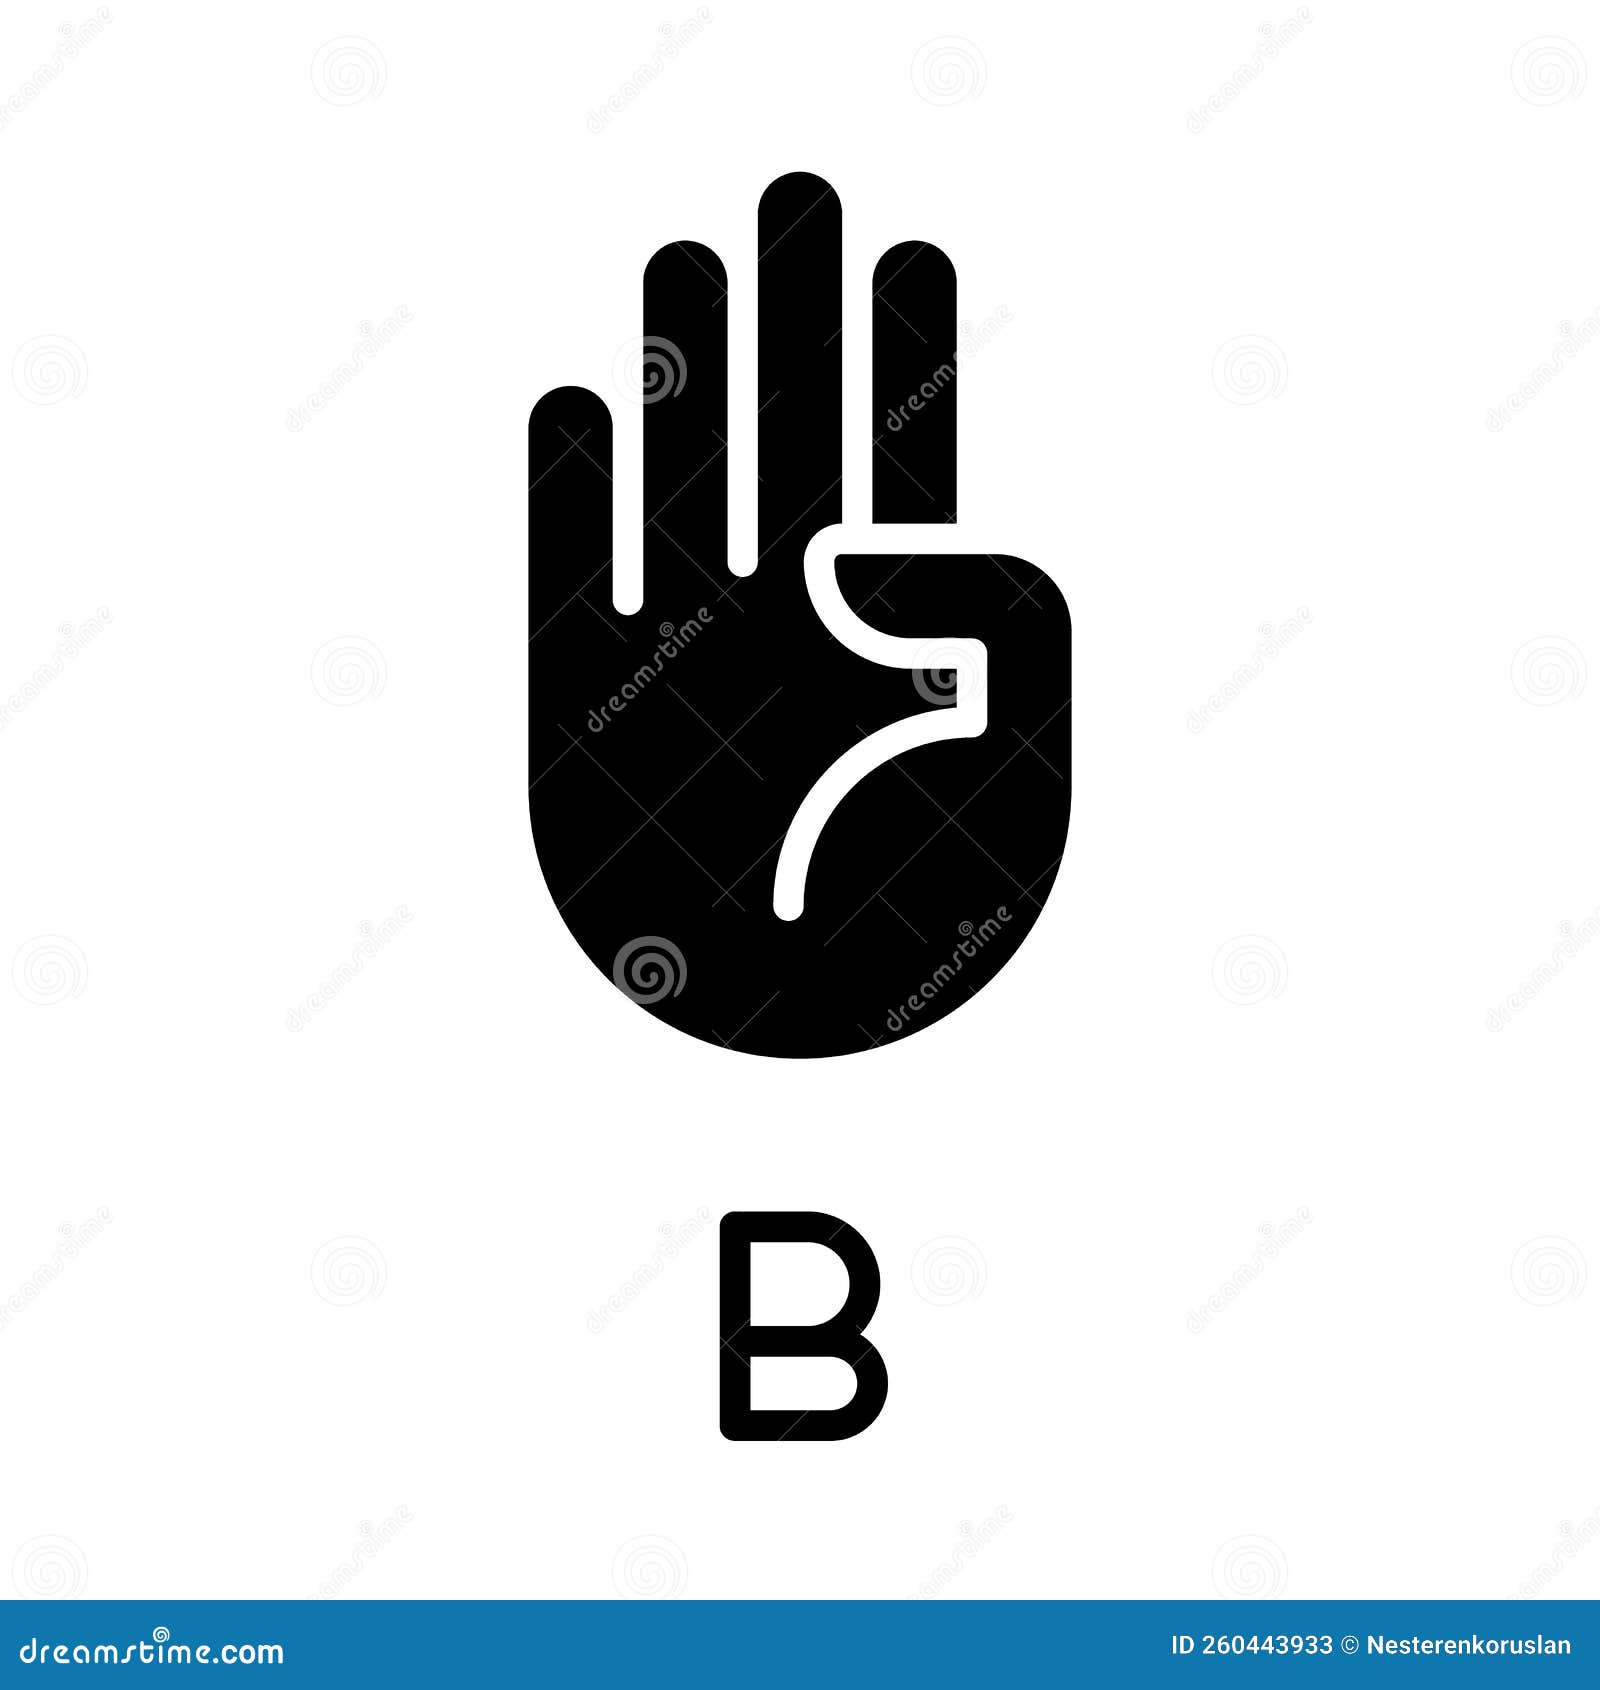 letter-b-in-american-sign-language-black-glyph-icon-cartoon-vector